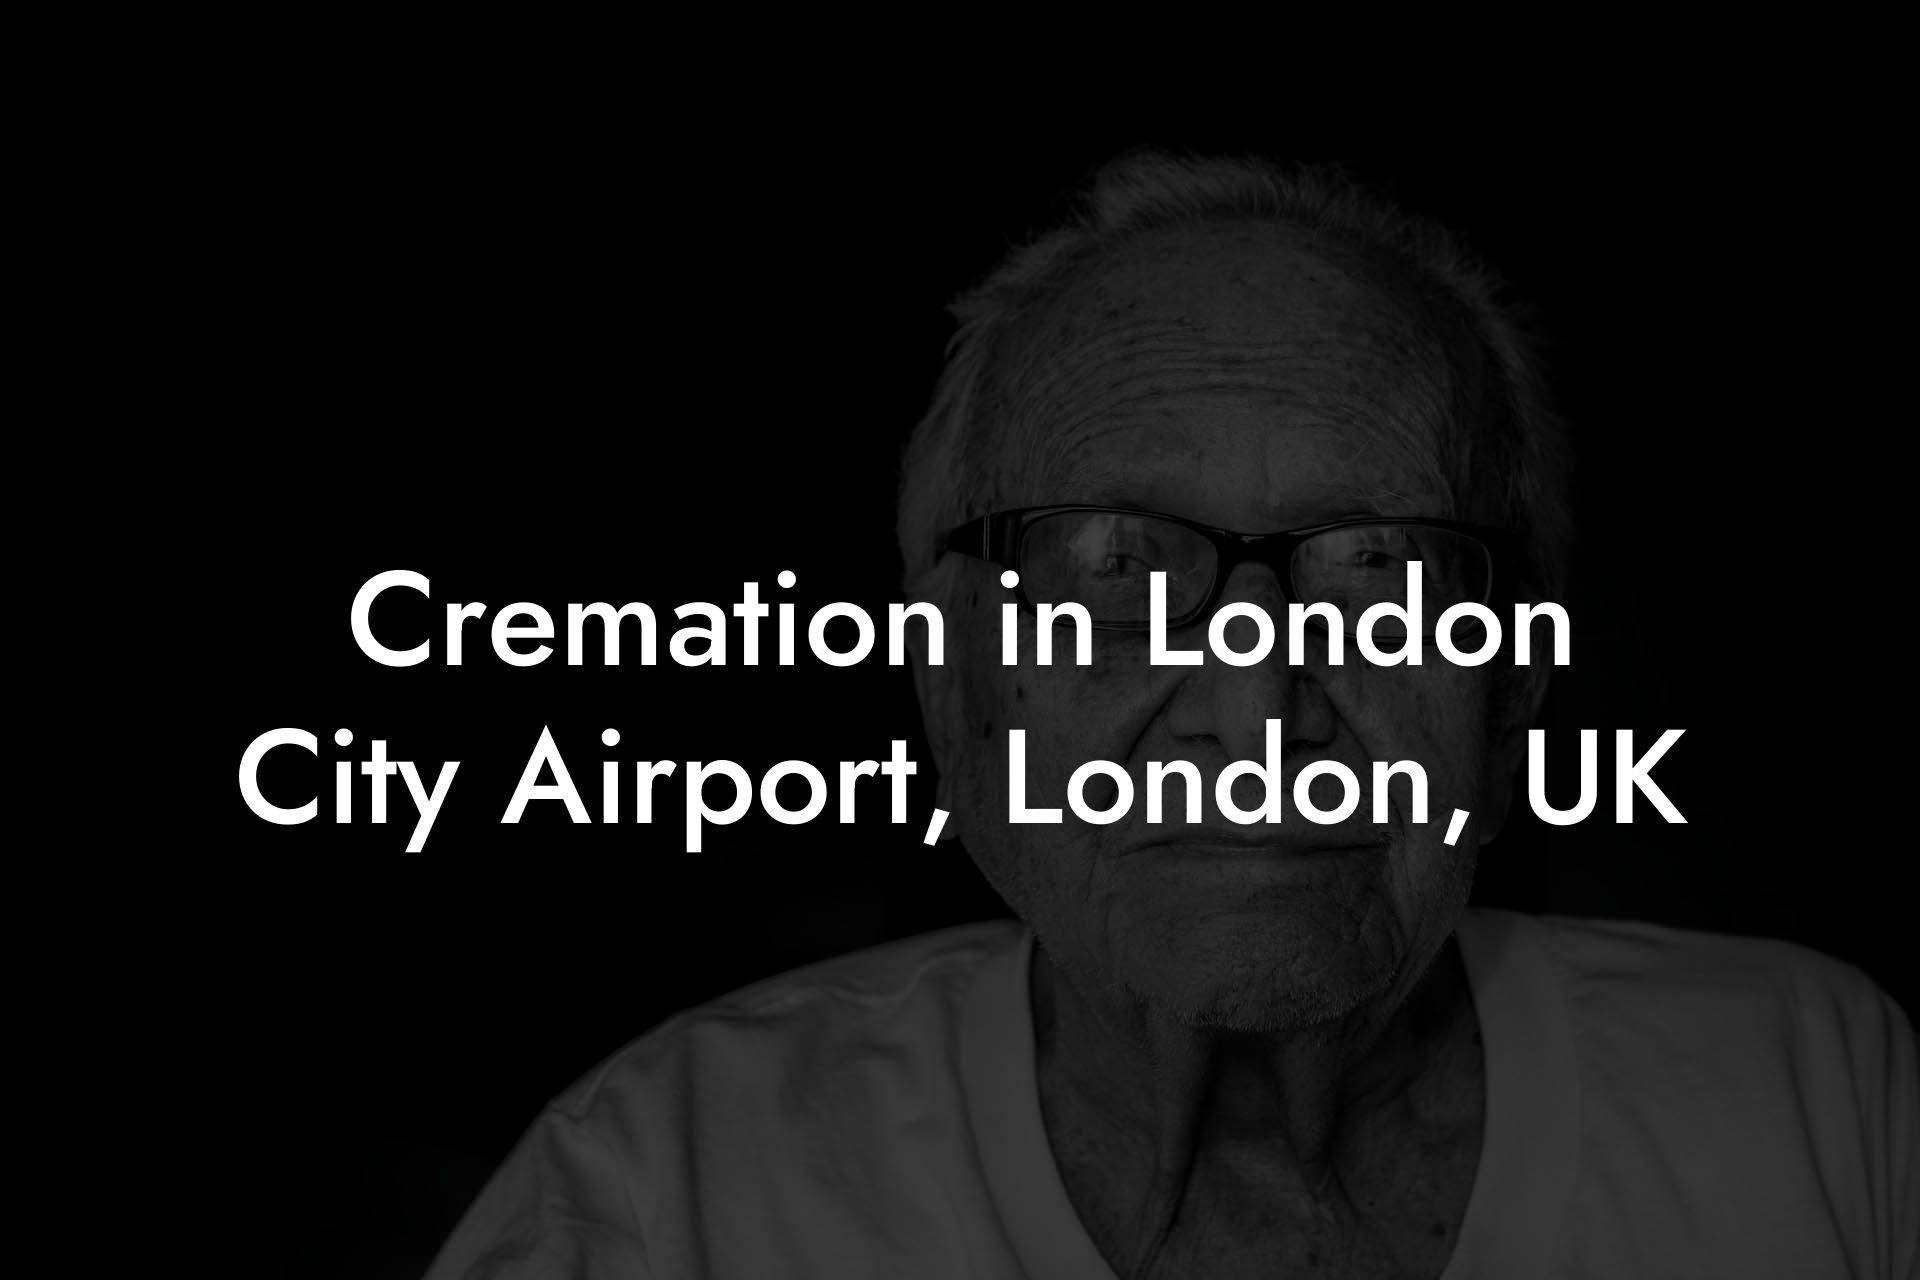 Cremation in London City Airport, London, UK